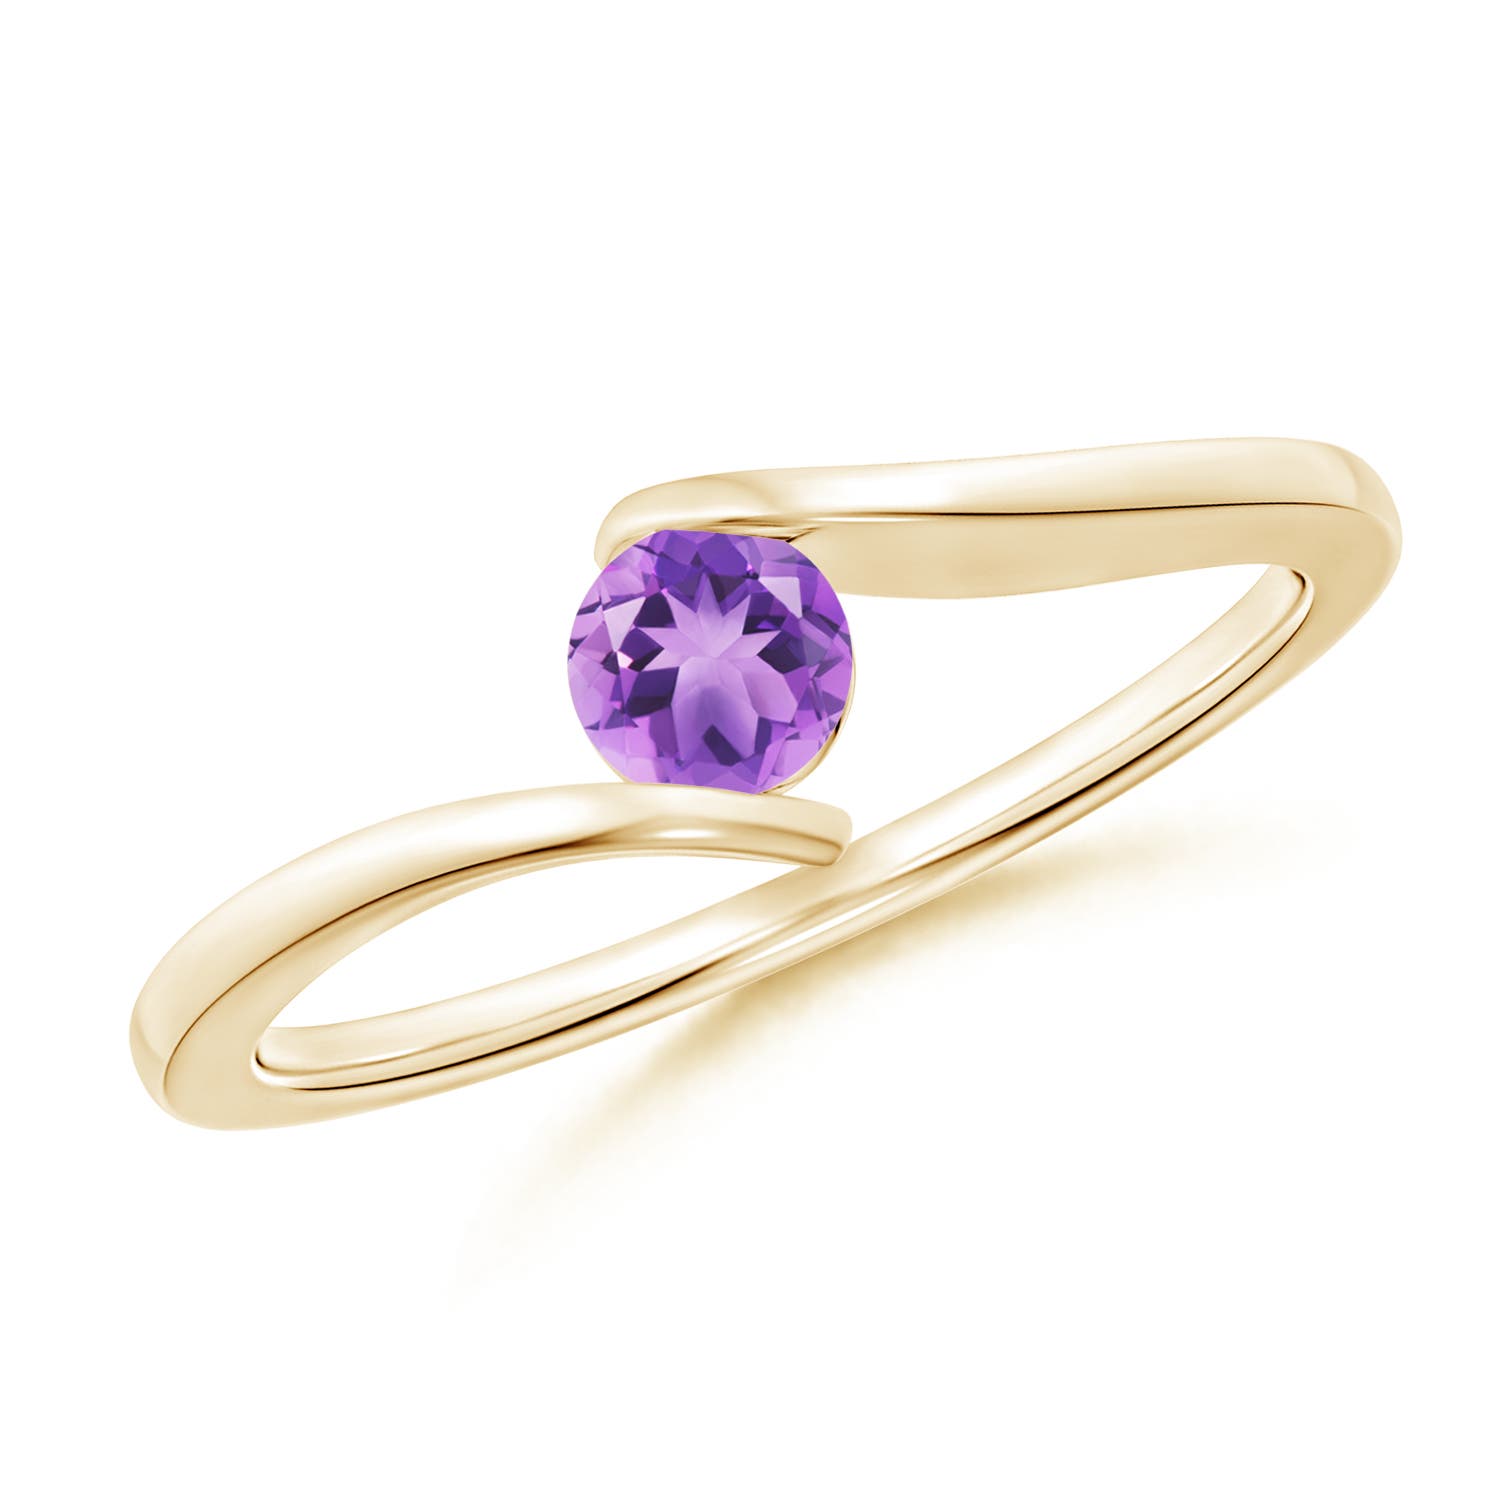 A - Amethyst / 0.25 CT / 14 KT Yellow Gold